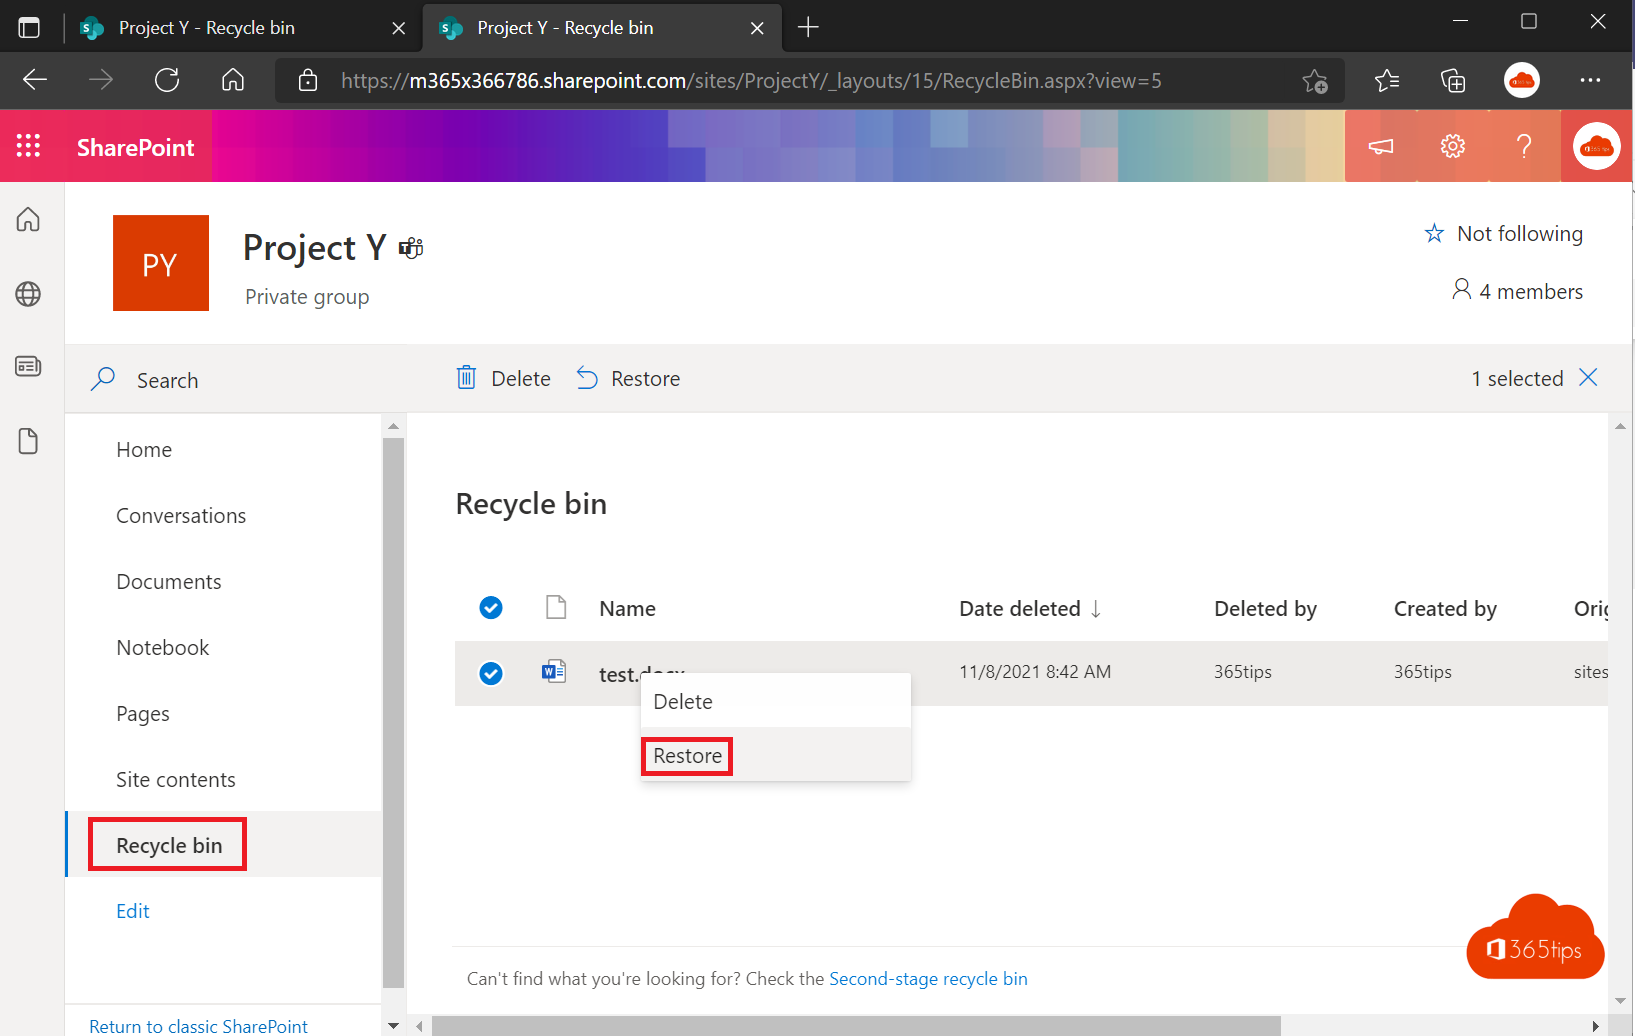 Tutorial: How to restore deleted files in Microsoft Teams or SharePoint?